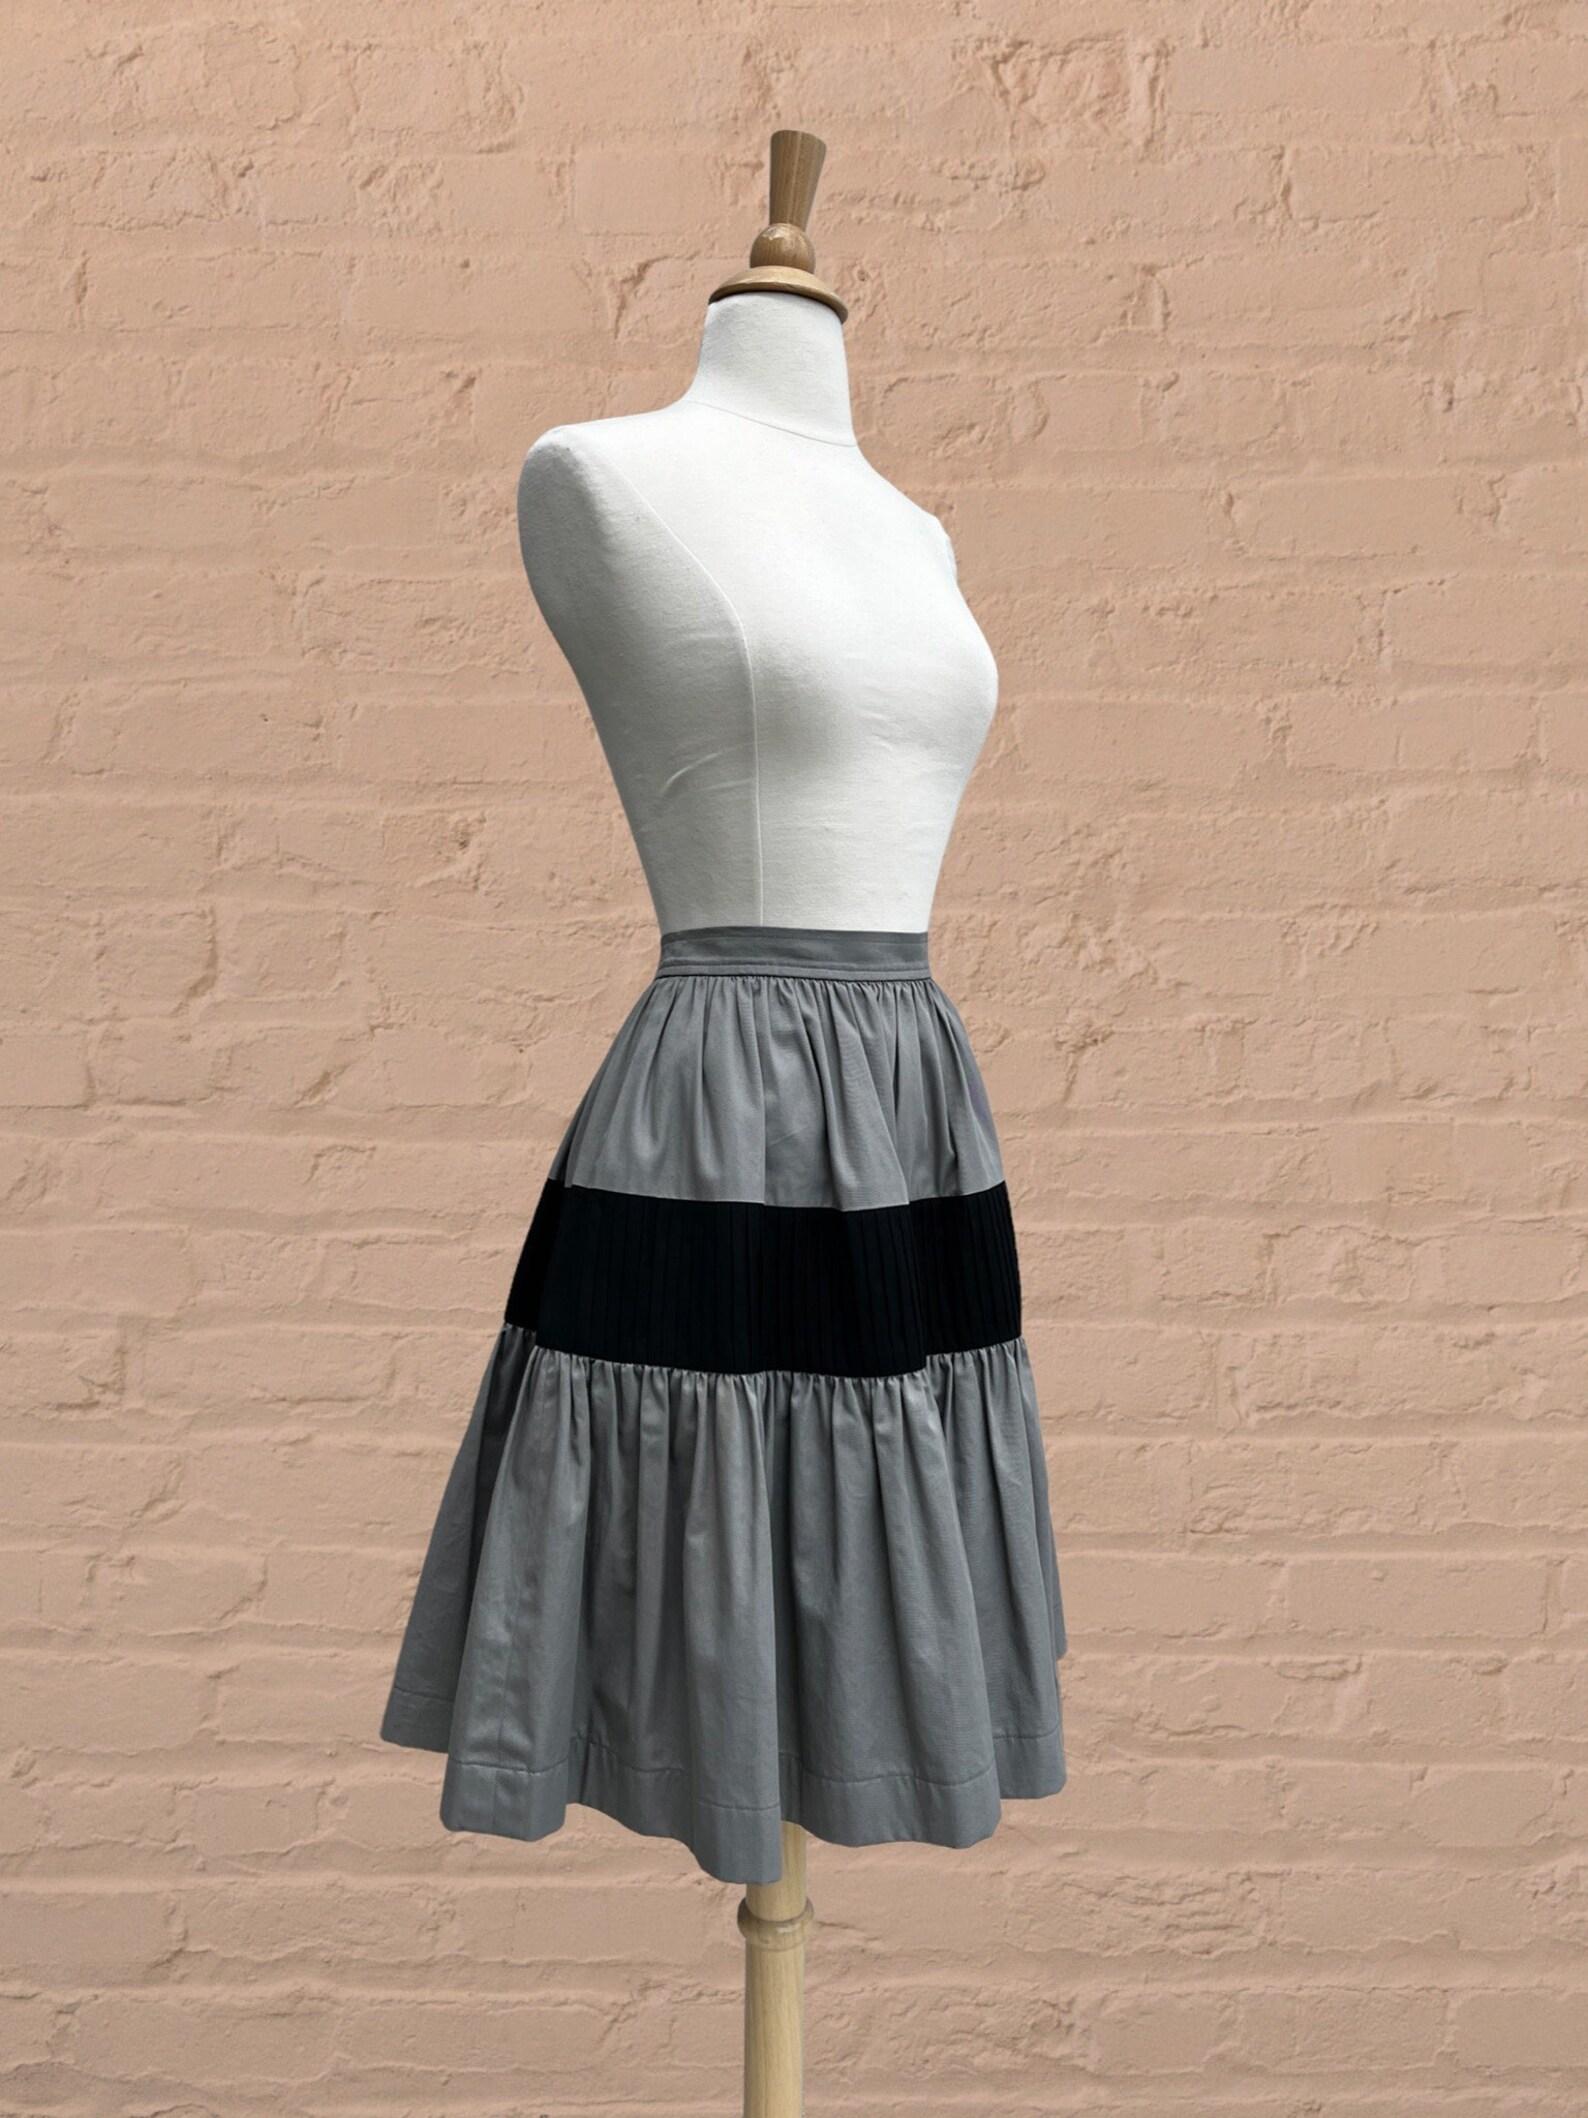 Yves Saint Laurent Colorblock Skirt, Circa 1980s In Excellent Condition For Sale In Brooklyn, NY